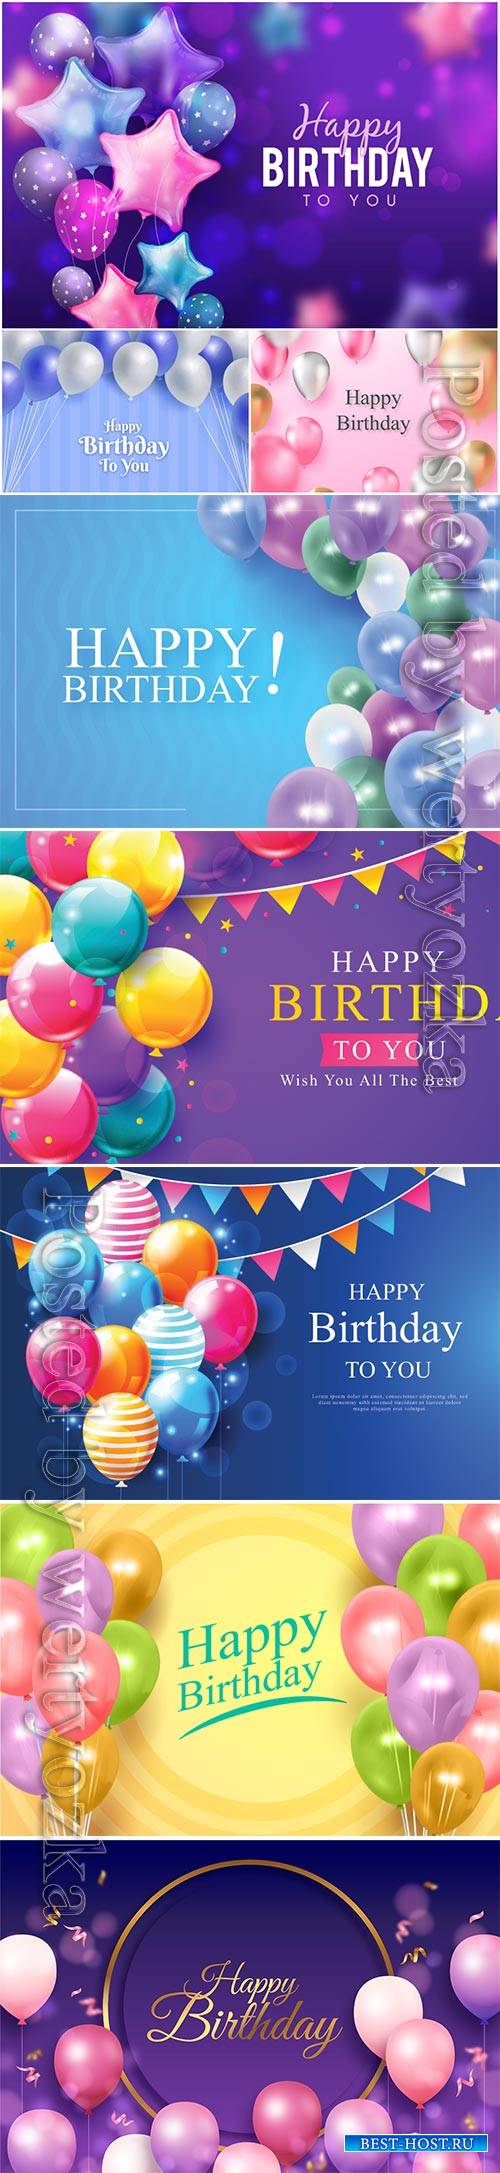 Happy birthday, vector holiday backgrounds with balloons